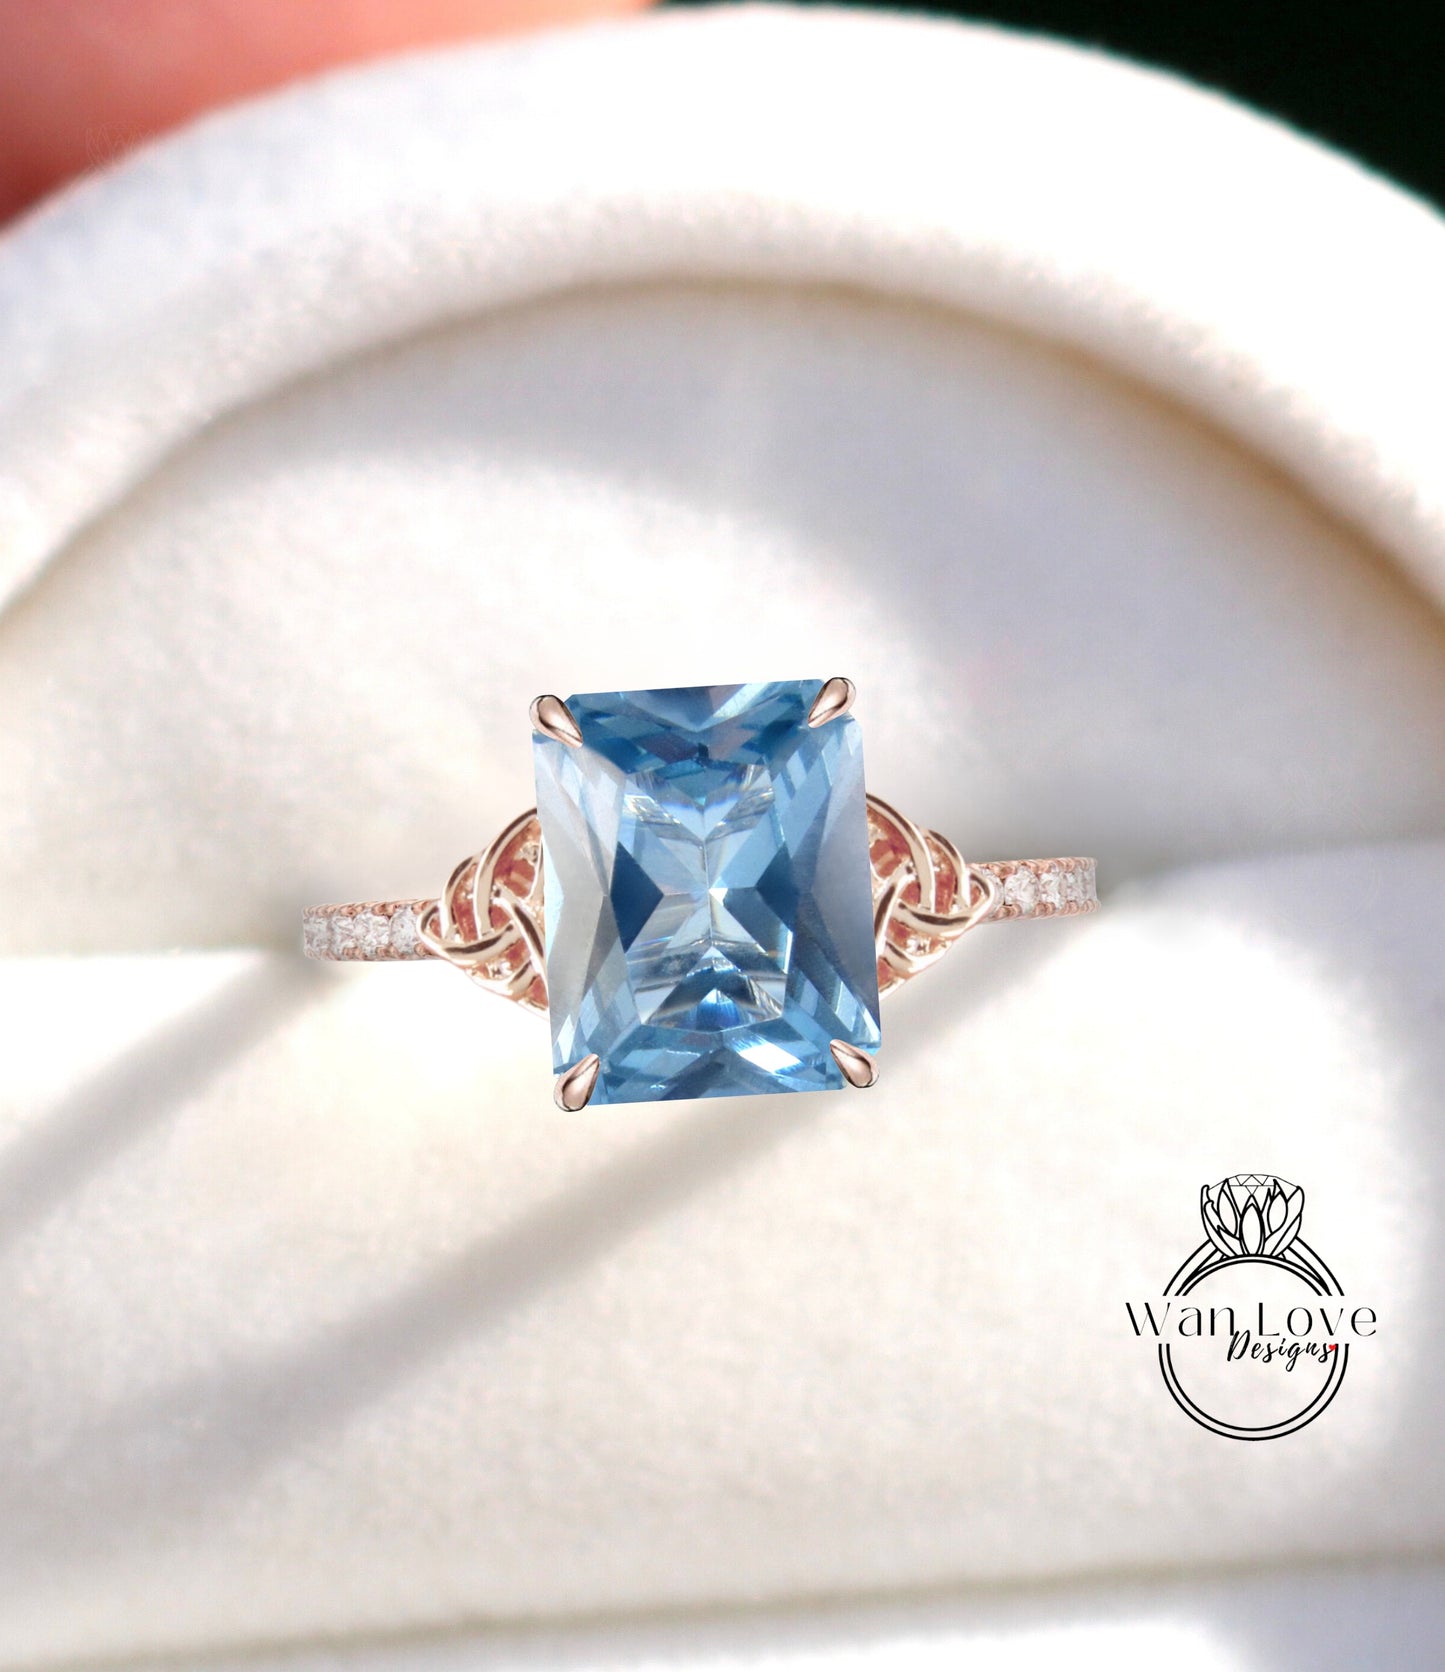 Celtic Aquamarine Spinel engagement ring rose gold Emerald cut diamond Celtic knot wedding ring Unique Bridal Promise Anniversary ring gift